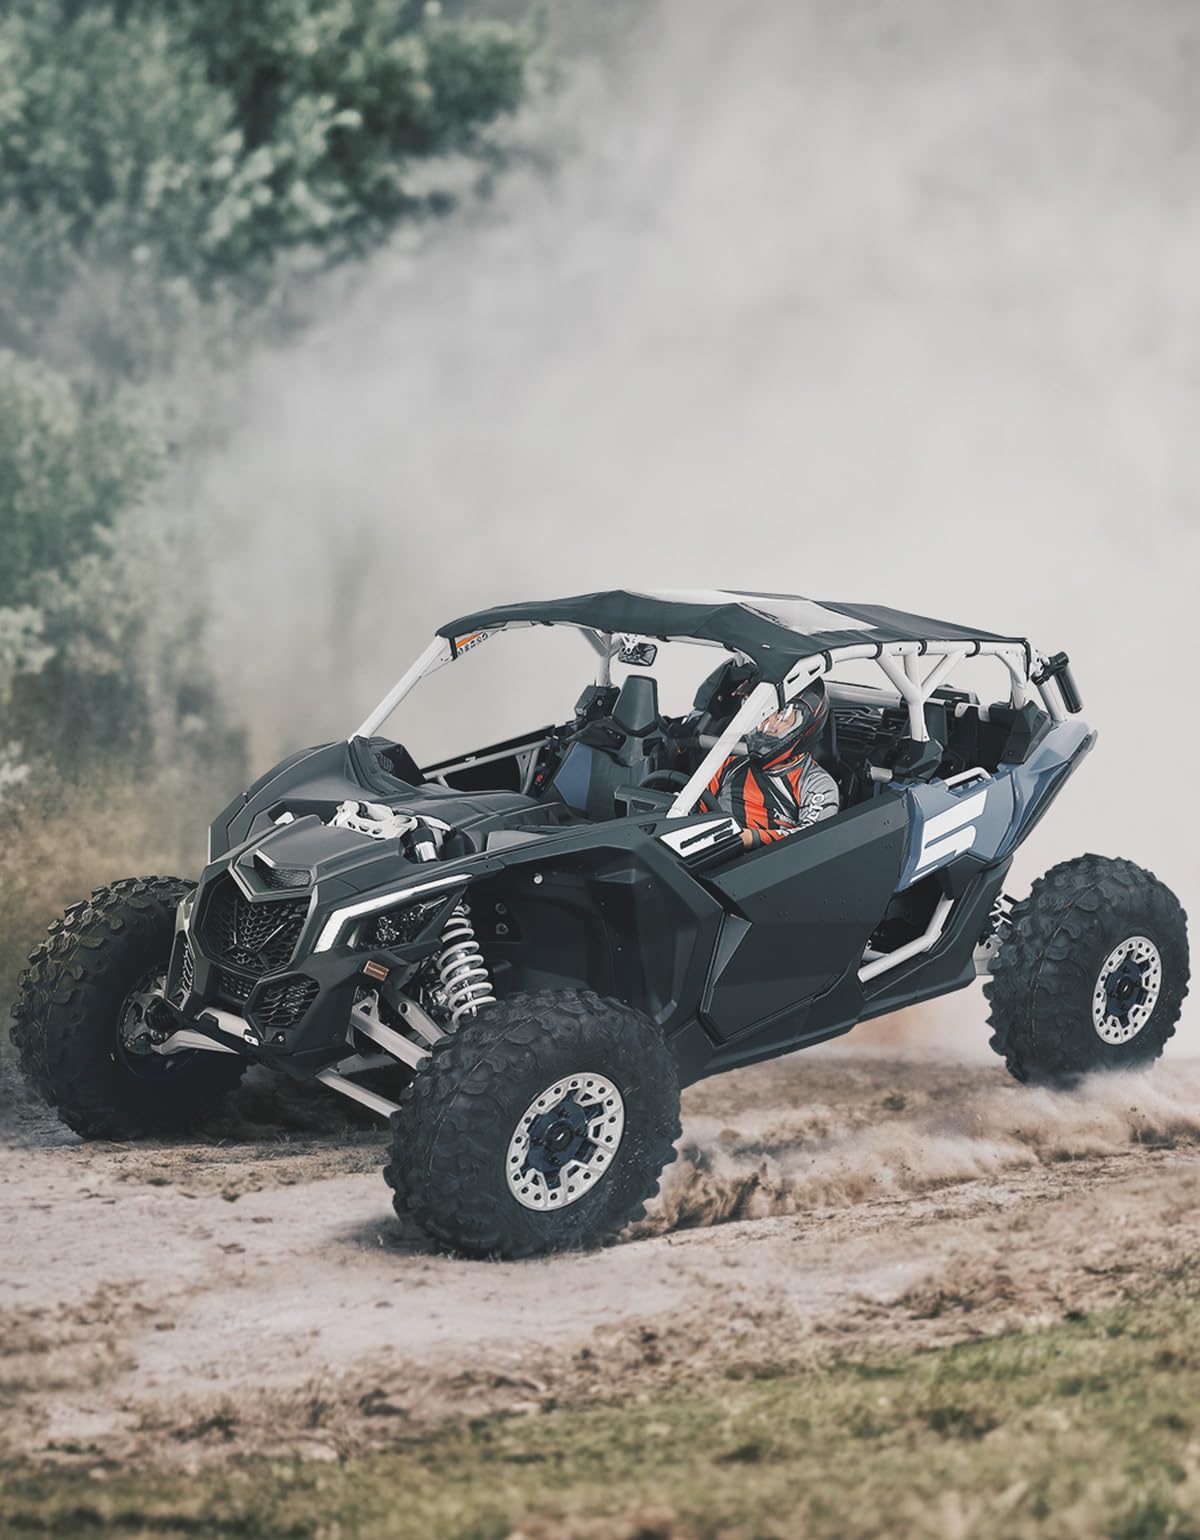 Canvas Soft Rooftop for Can-Am Maverick X3 Max -Kemimoto